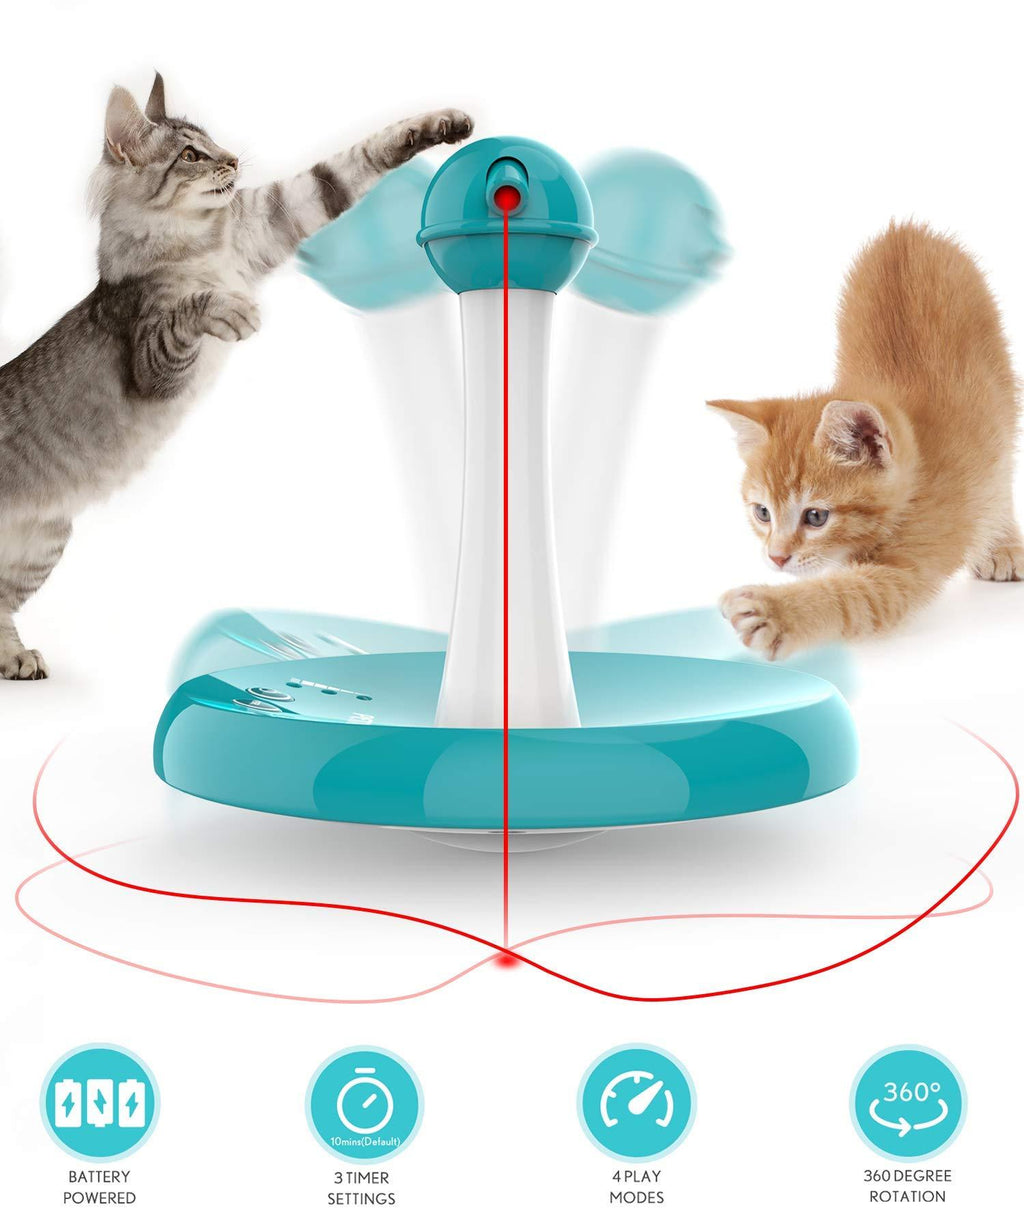 [Australia] - Newest Cat Laser toy,Upgraded Interactive Tumbler Laser Toys for Pet,Automatic Electronic Cats Pets Kitten Chaser Toy with Laser Indoor,4 Speed Modes,3 Timer Settings,Irregular Circle,Safe Material 